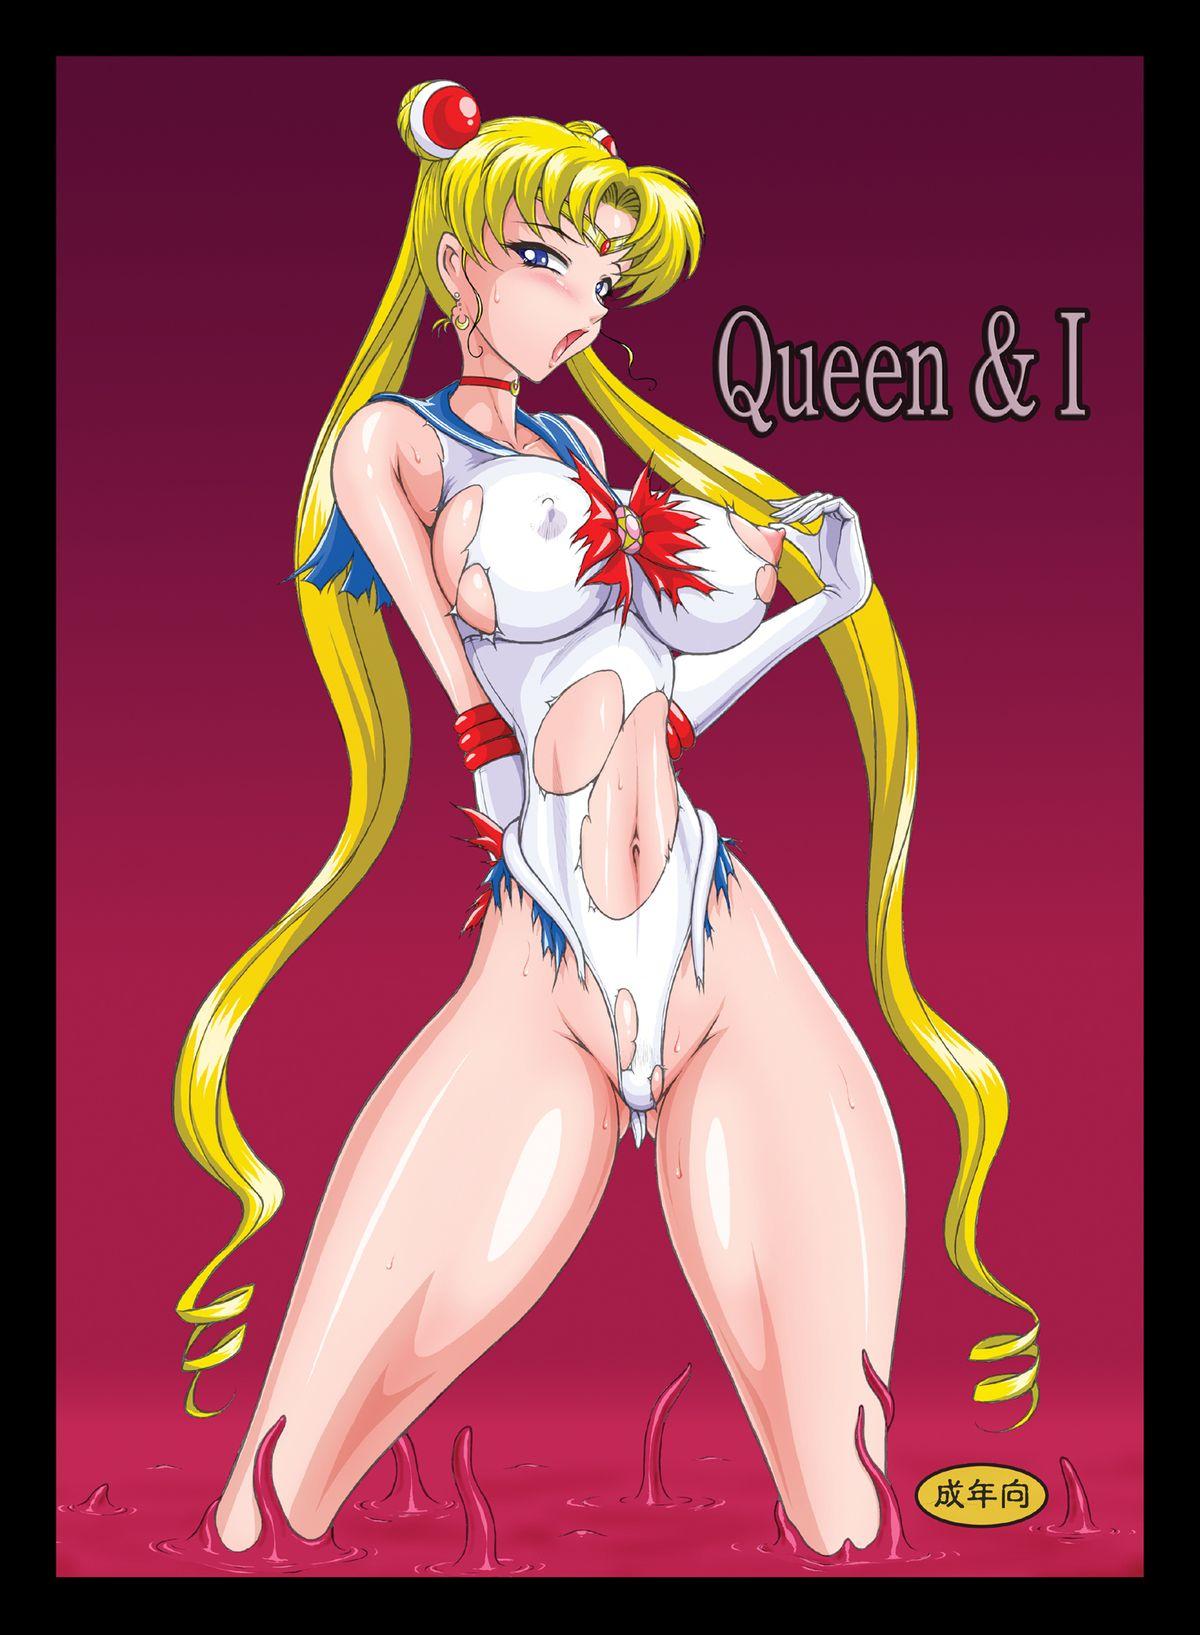 Kissing Queen & I - Sailor moon Bokep - Page 2